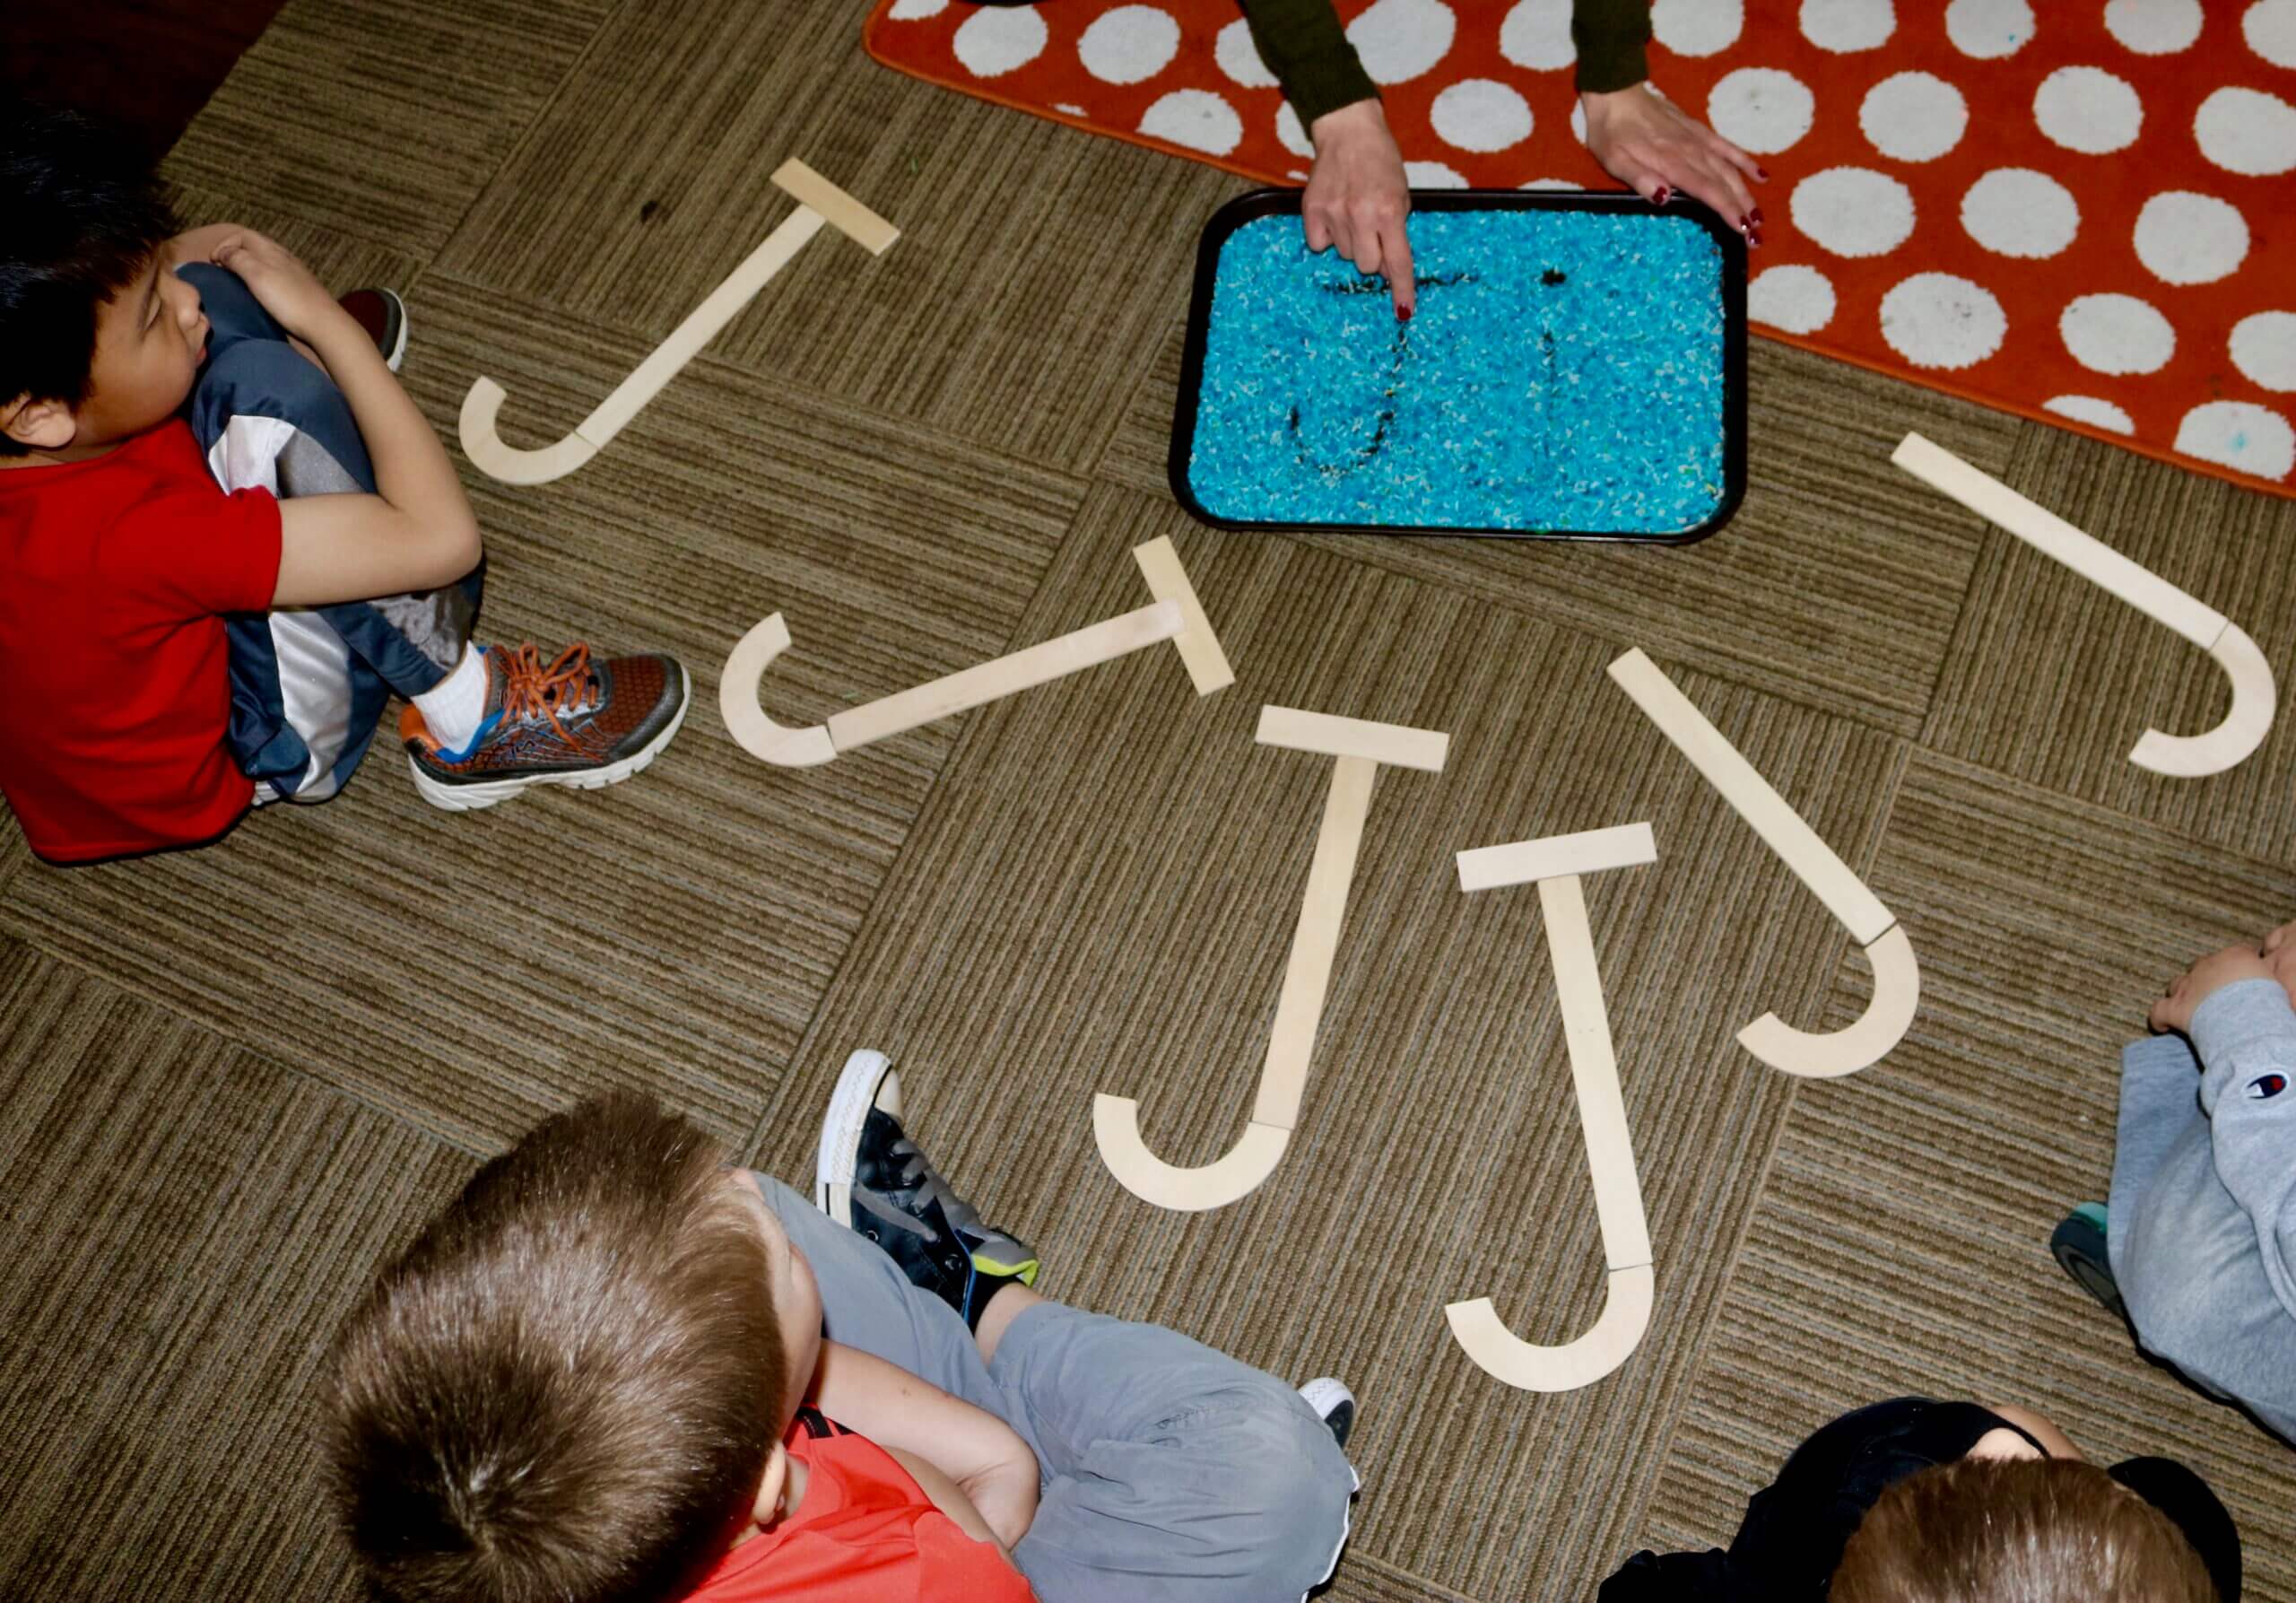 Example of sensory rice being used with the letter "J" with students of WCDS intensely looking on.